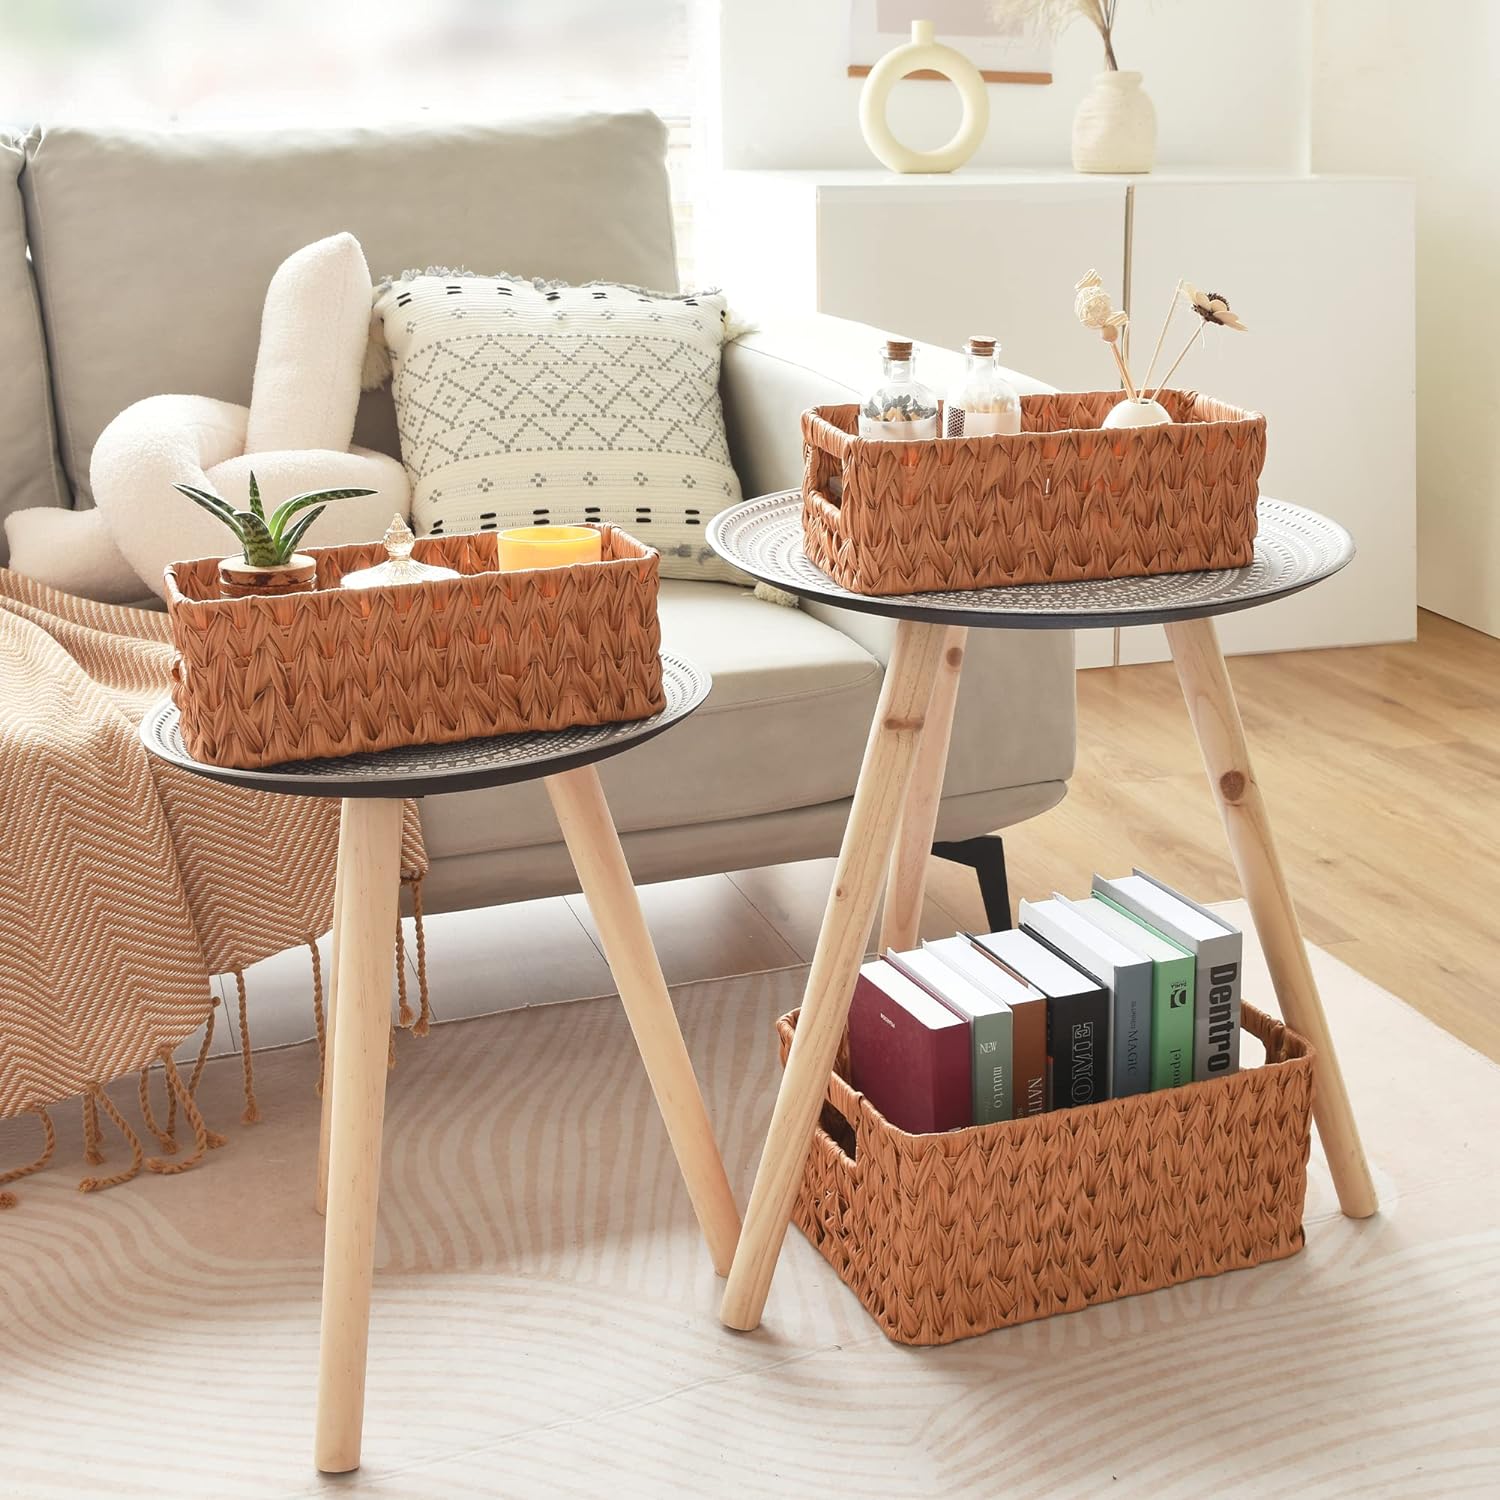 Best Wicker Baskets to Make Your Home Classy » Residence Style